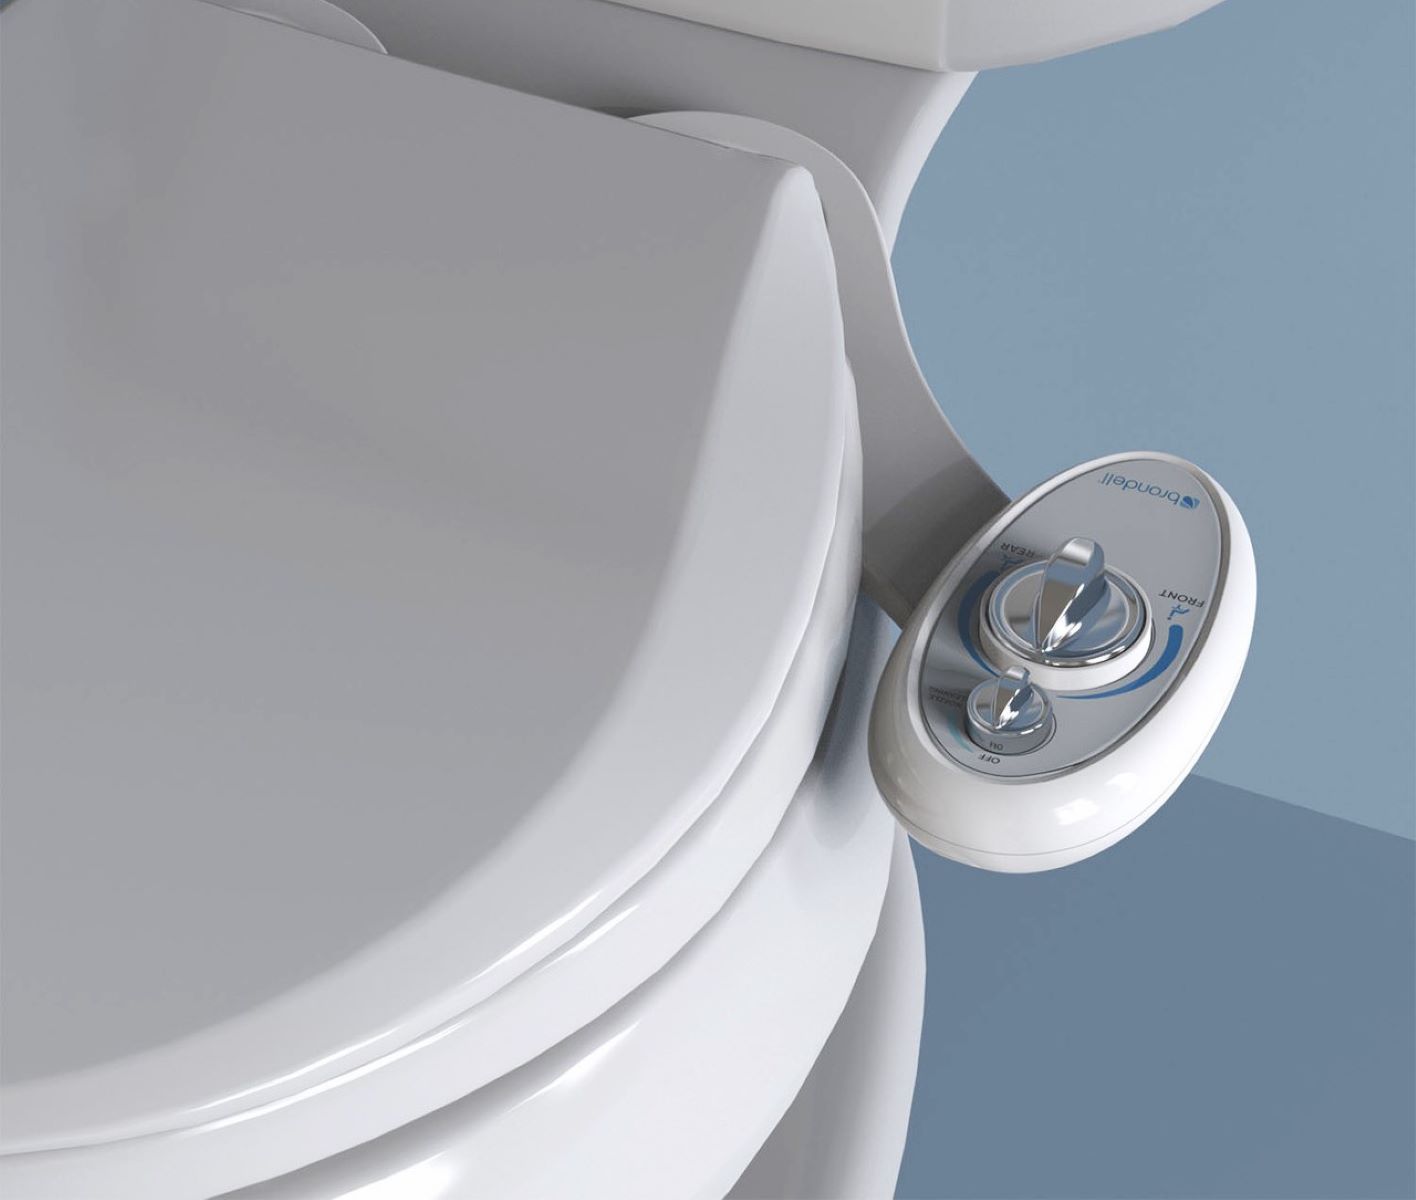 How To Clean Brondell Bidet Nozzle